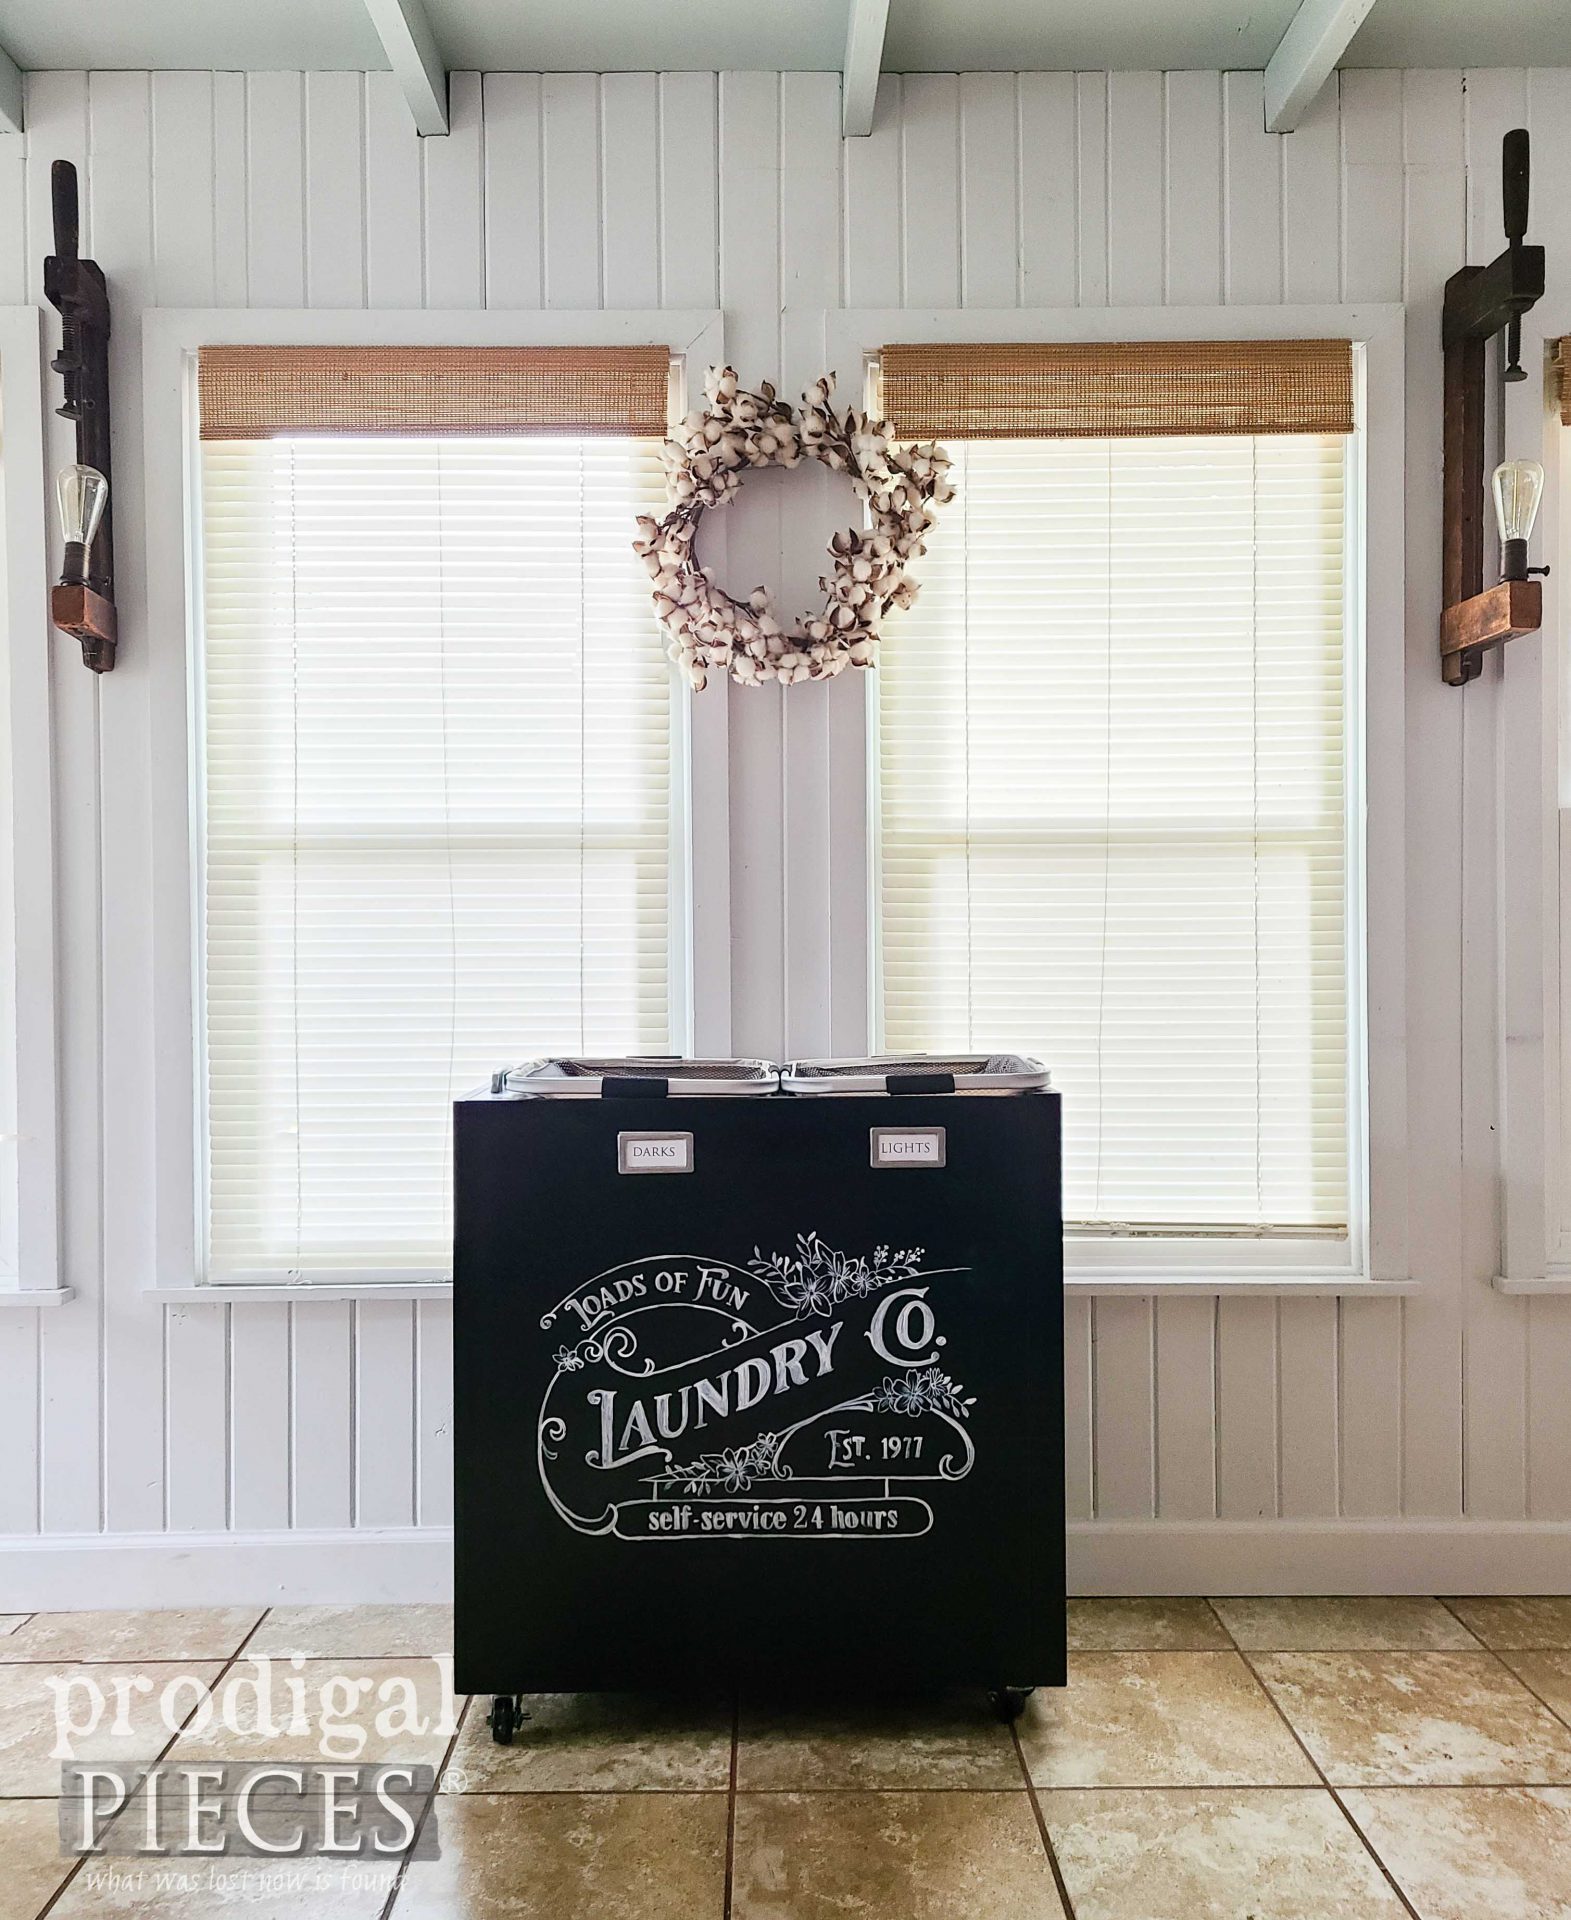 Industrial Style Laundry Bin Made from Upcycled Filing Cabinet by Larissa of Prodigal Pieces | prodigalpieces.com #prodigalpieces #laundry #industrial #diy